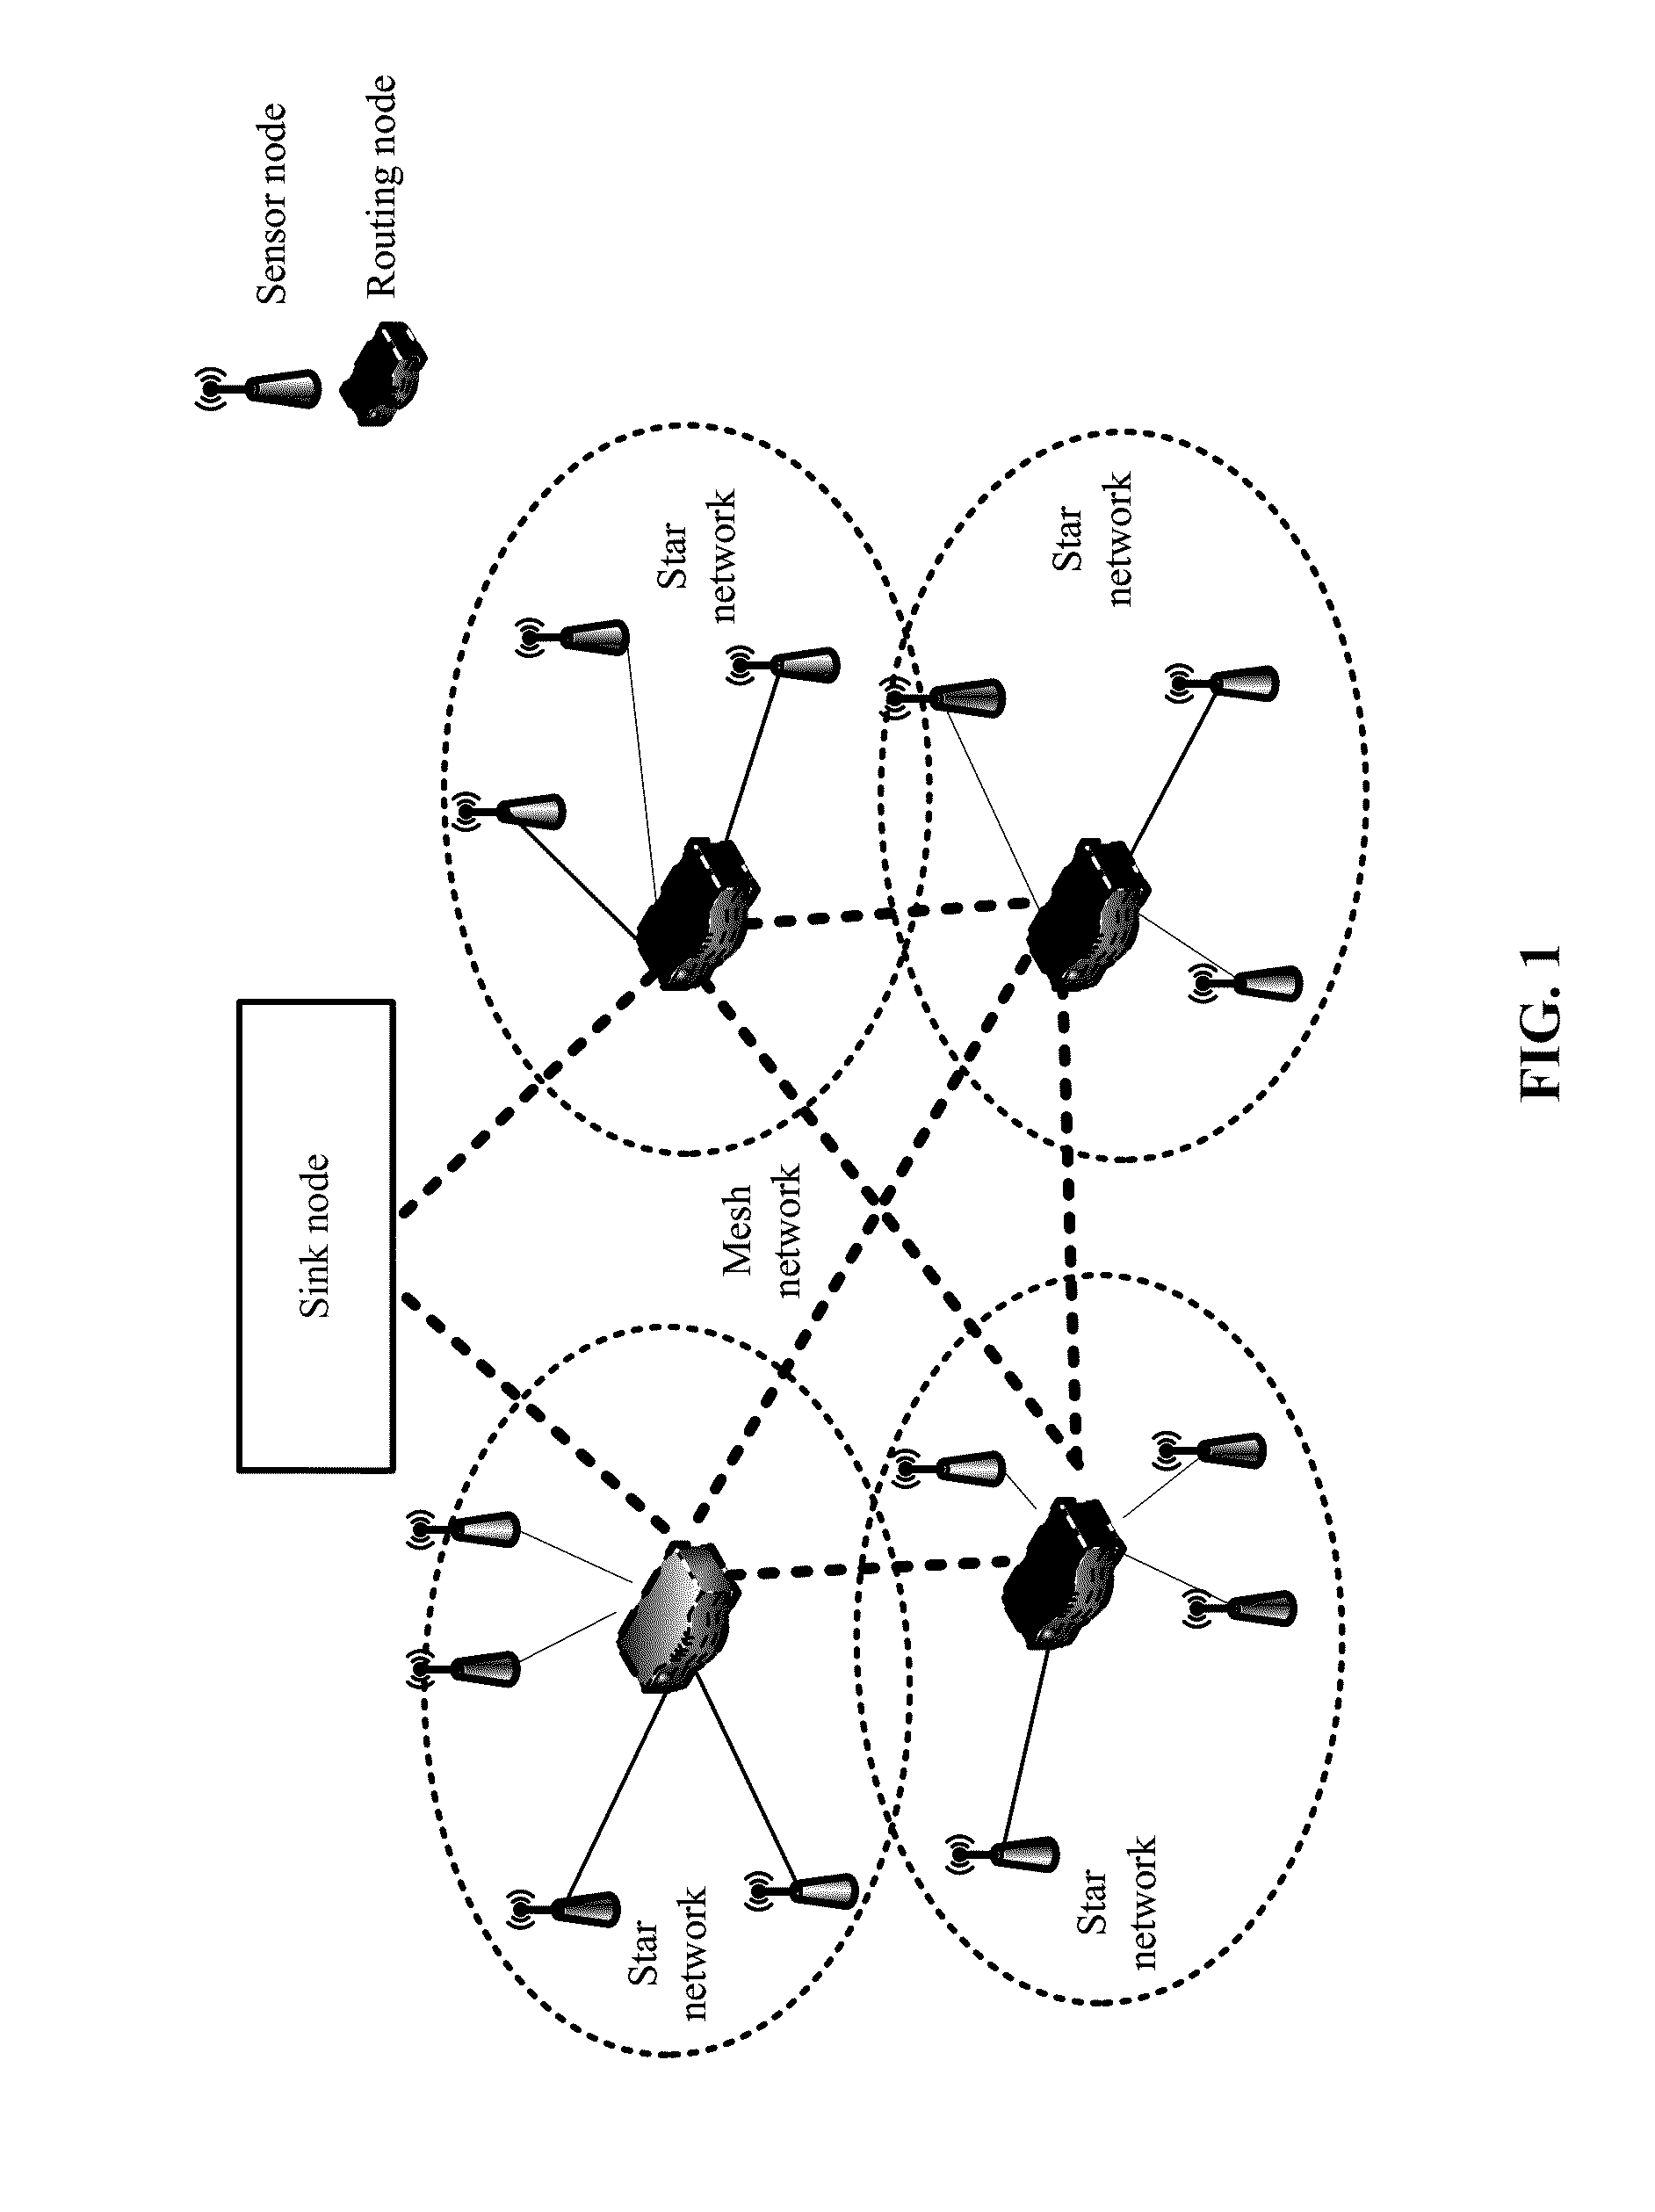 Method for two-stage packet aggregation facing wireless sensor network of hybrid topology structure